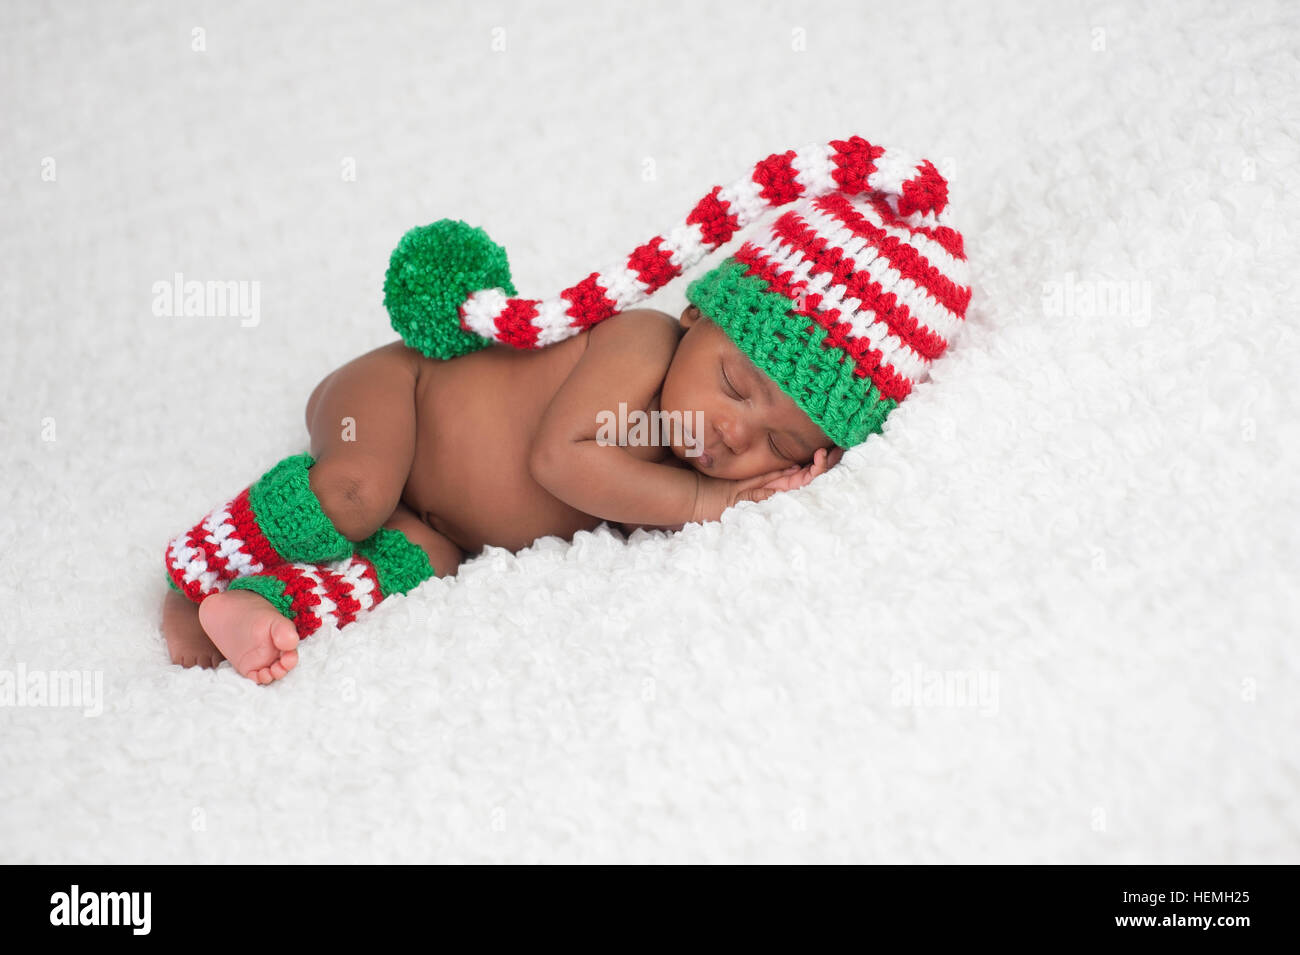 A one month old baby girl wearing a crocheted, red, white and green stocking cap and matching leg warmers. Photographed on a white, fluffy blanket. Stock Photo